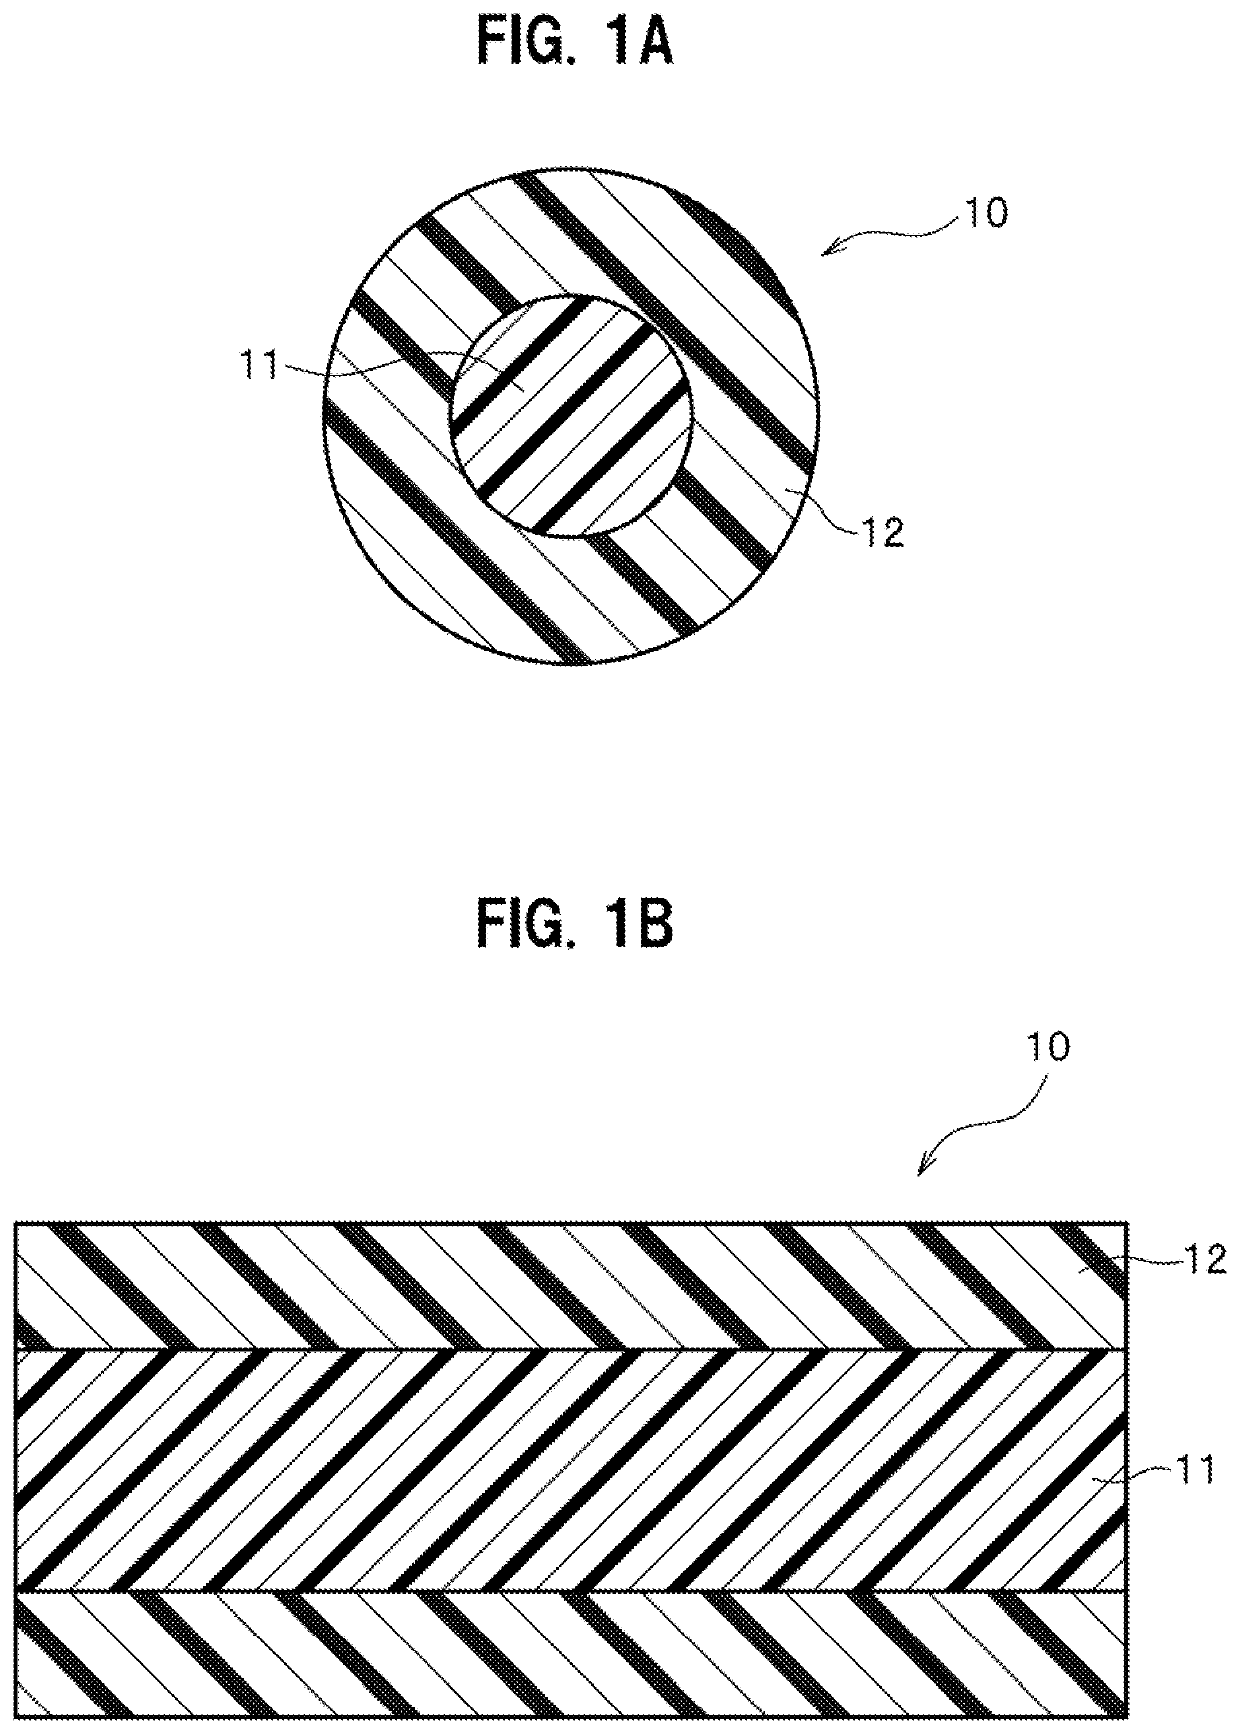 Core-sheath composite fiber and method for producing same